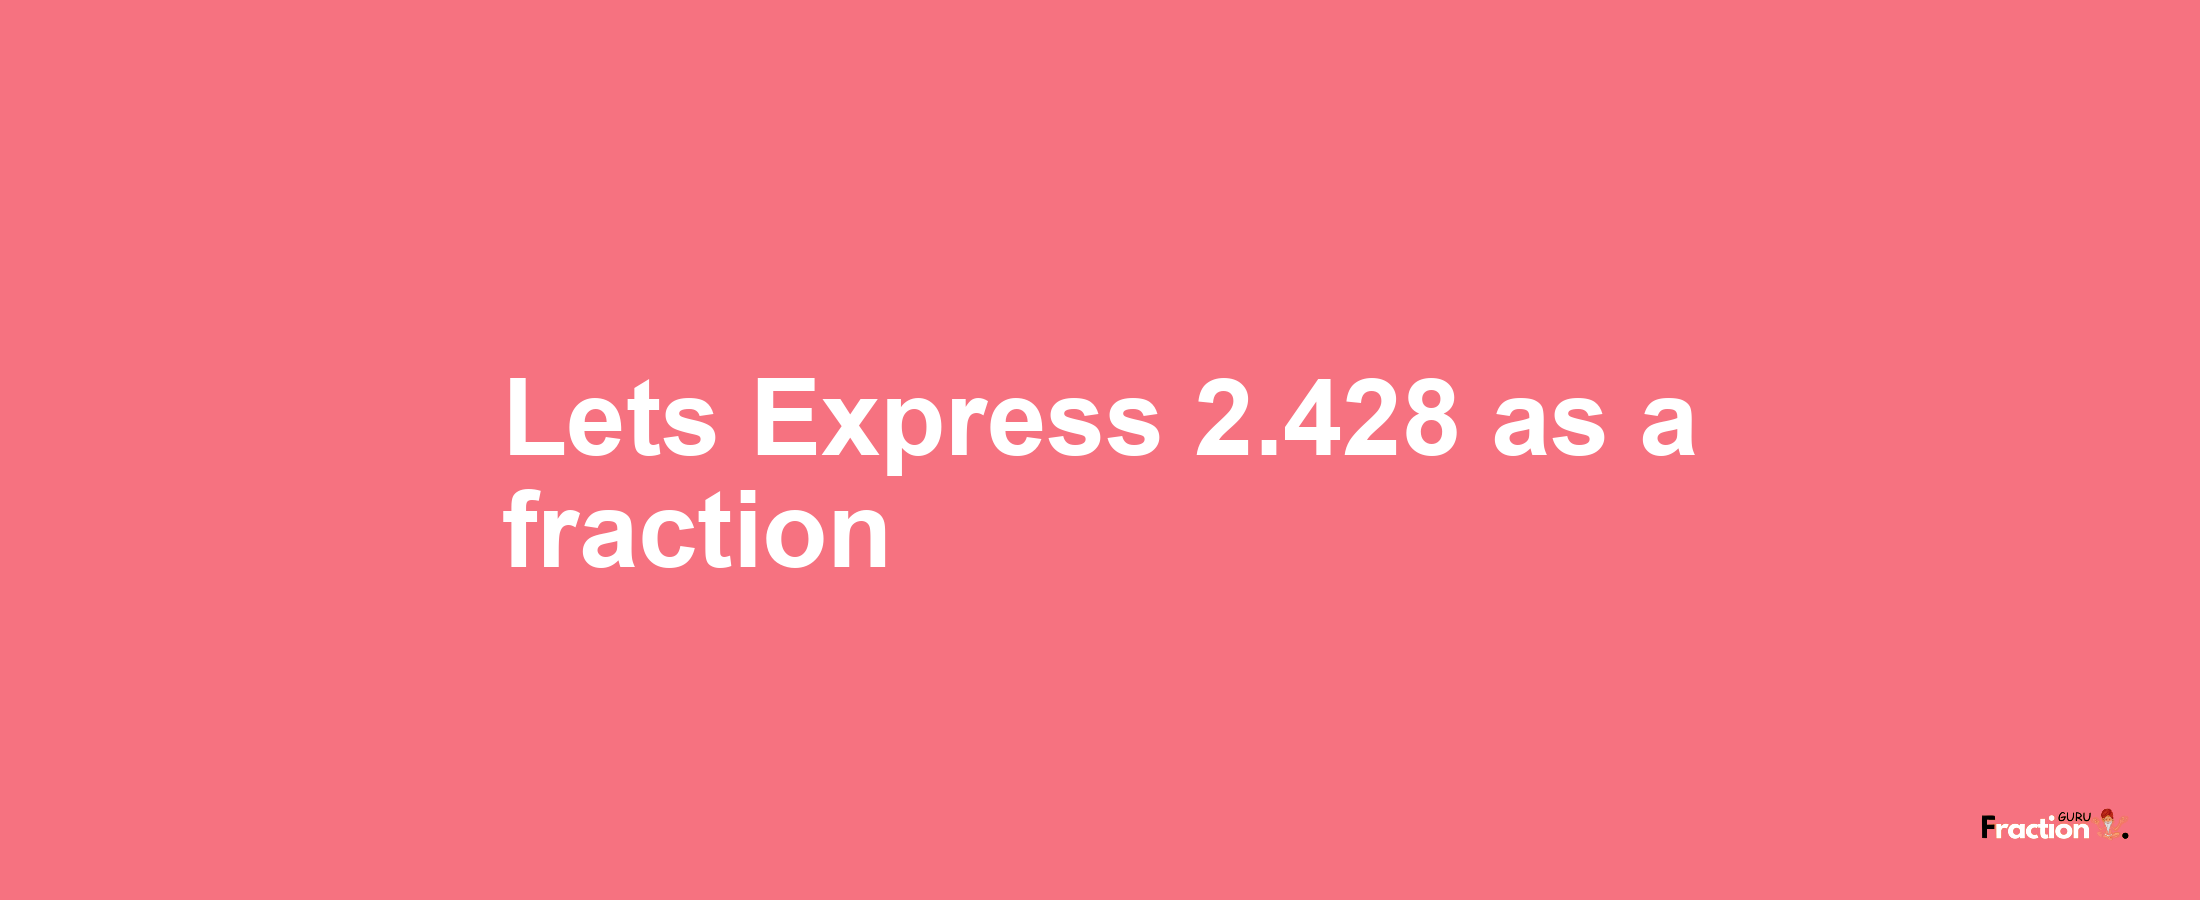 Lets Express 2.428 as afraction